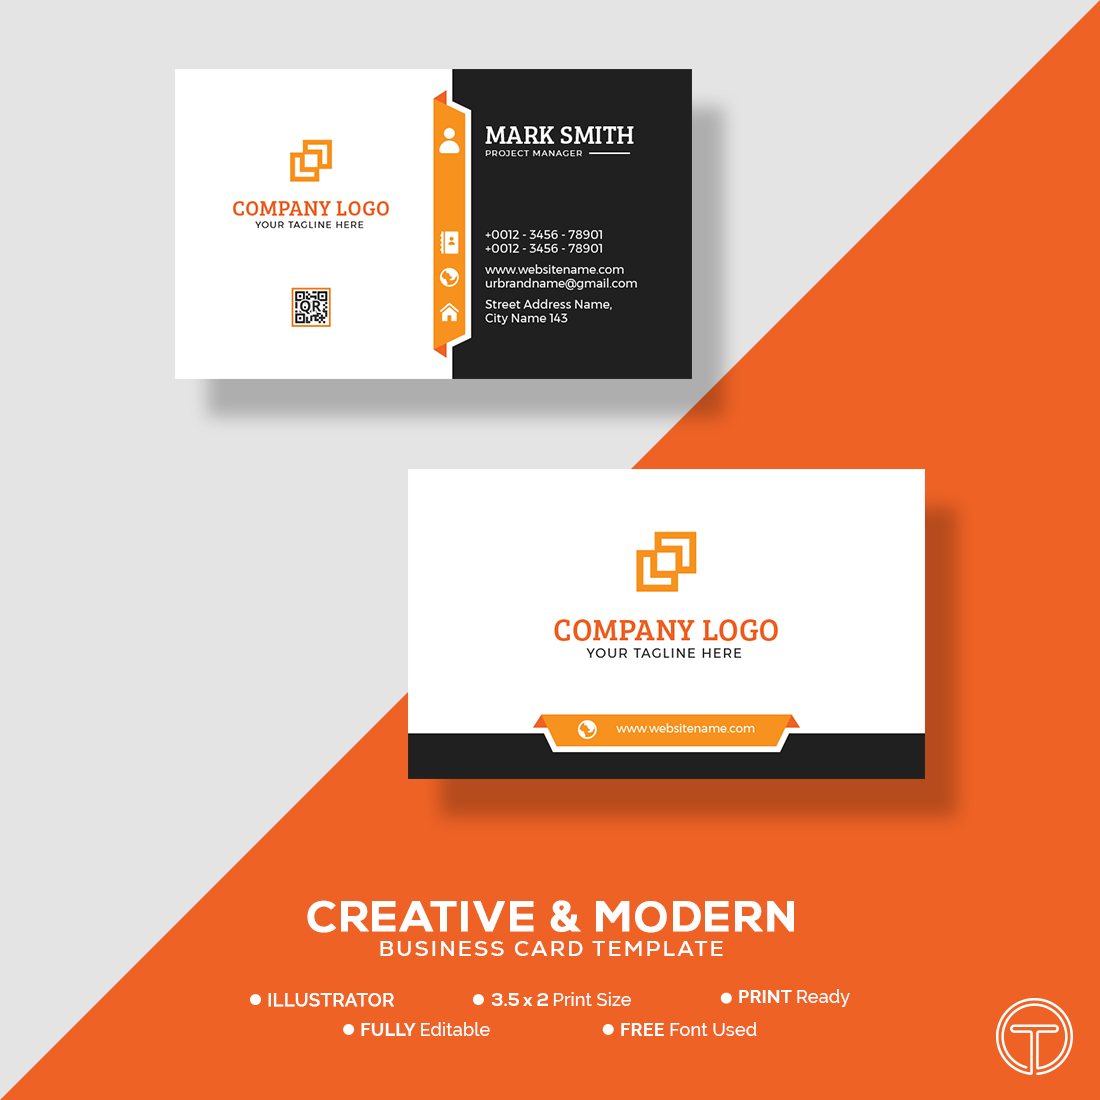 easy customizable and editable business card template 1